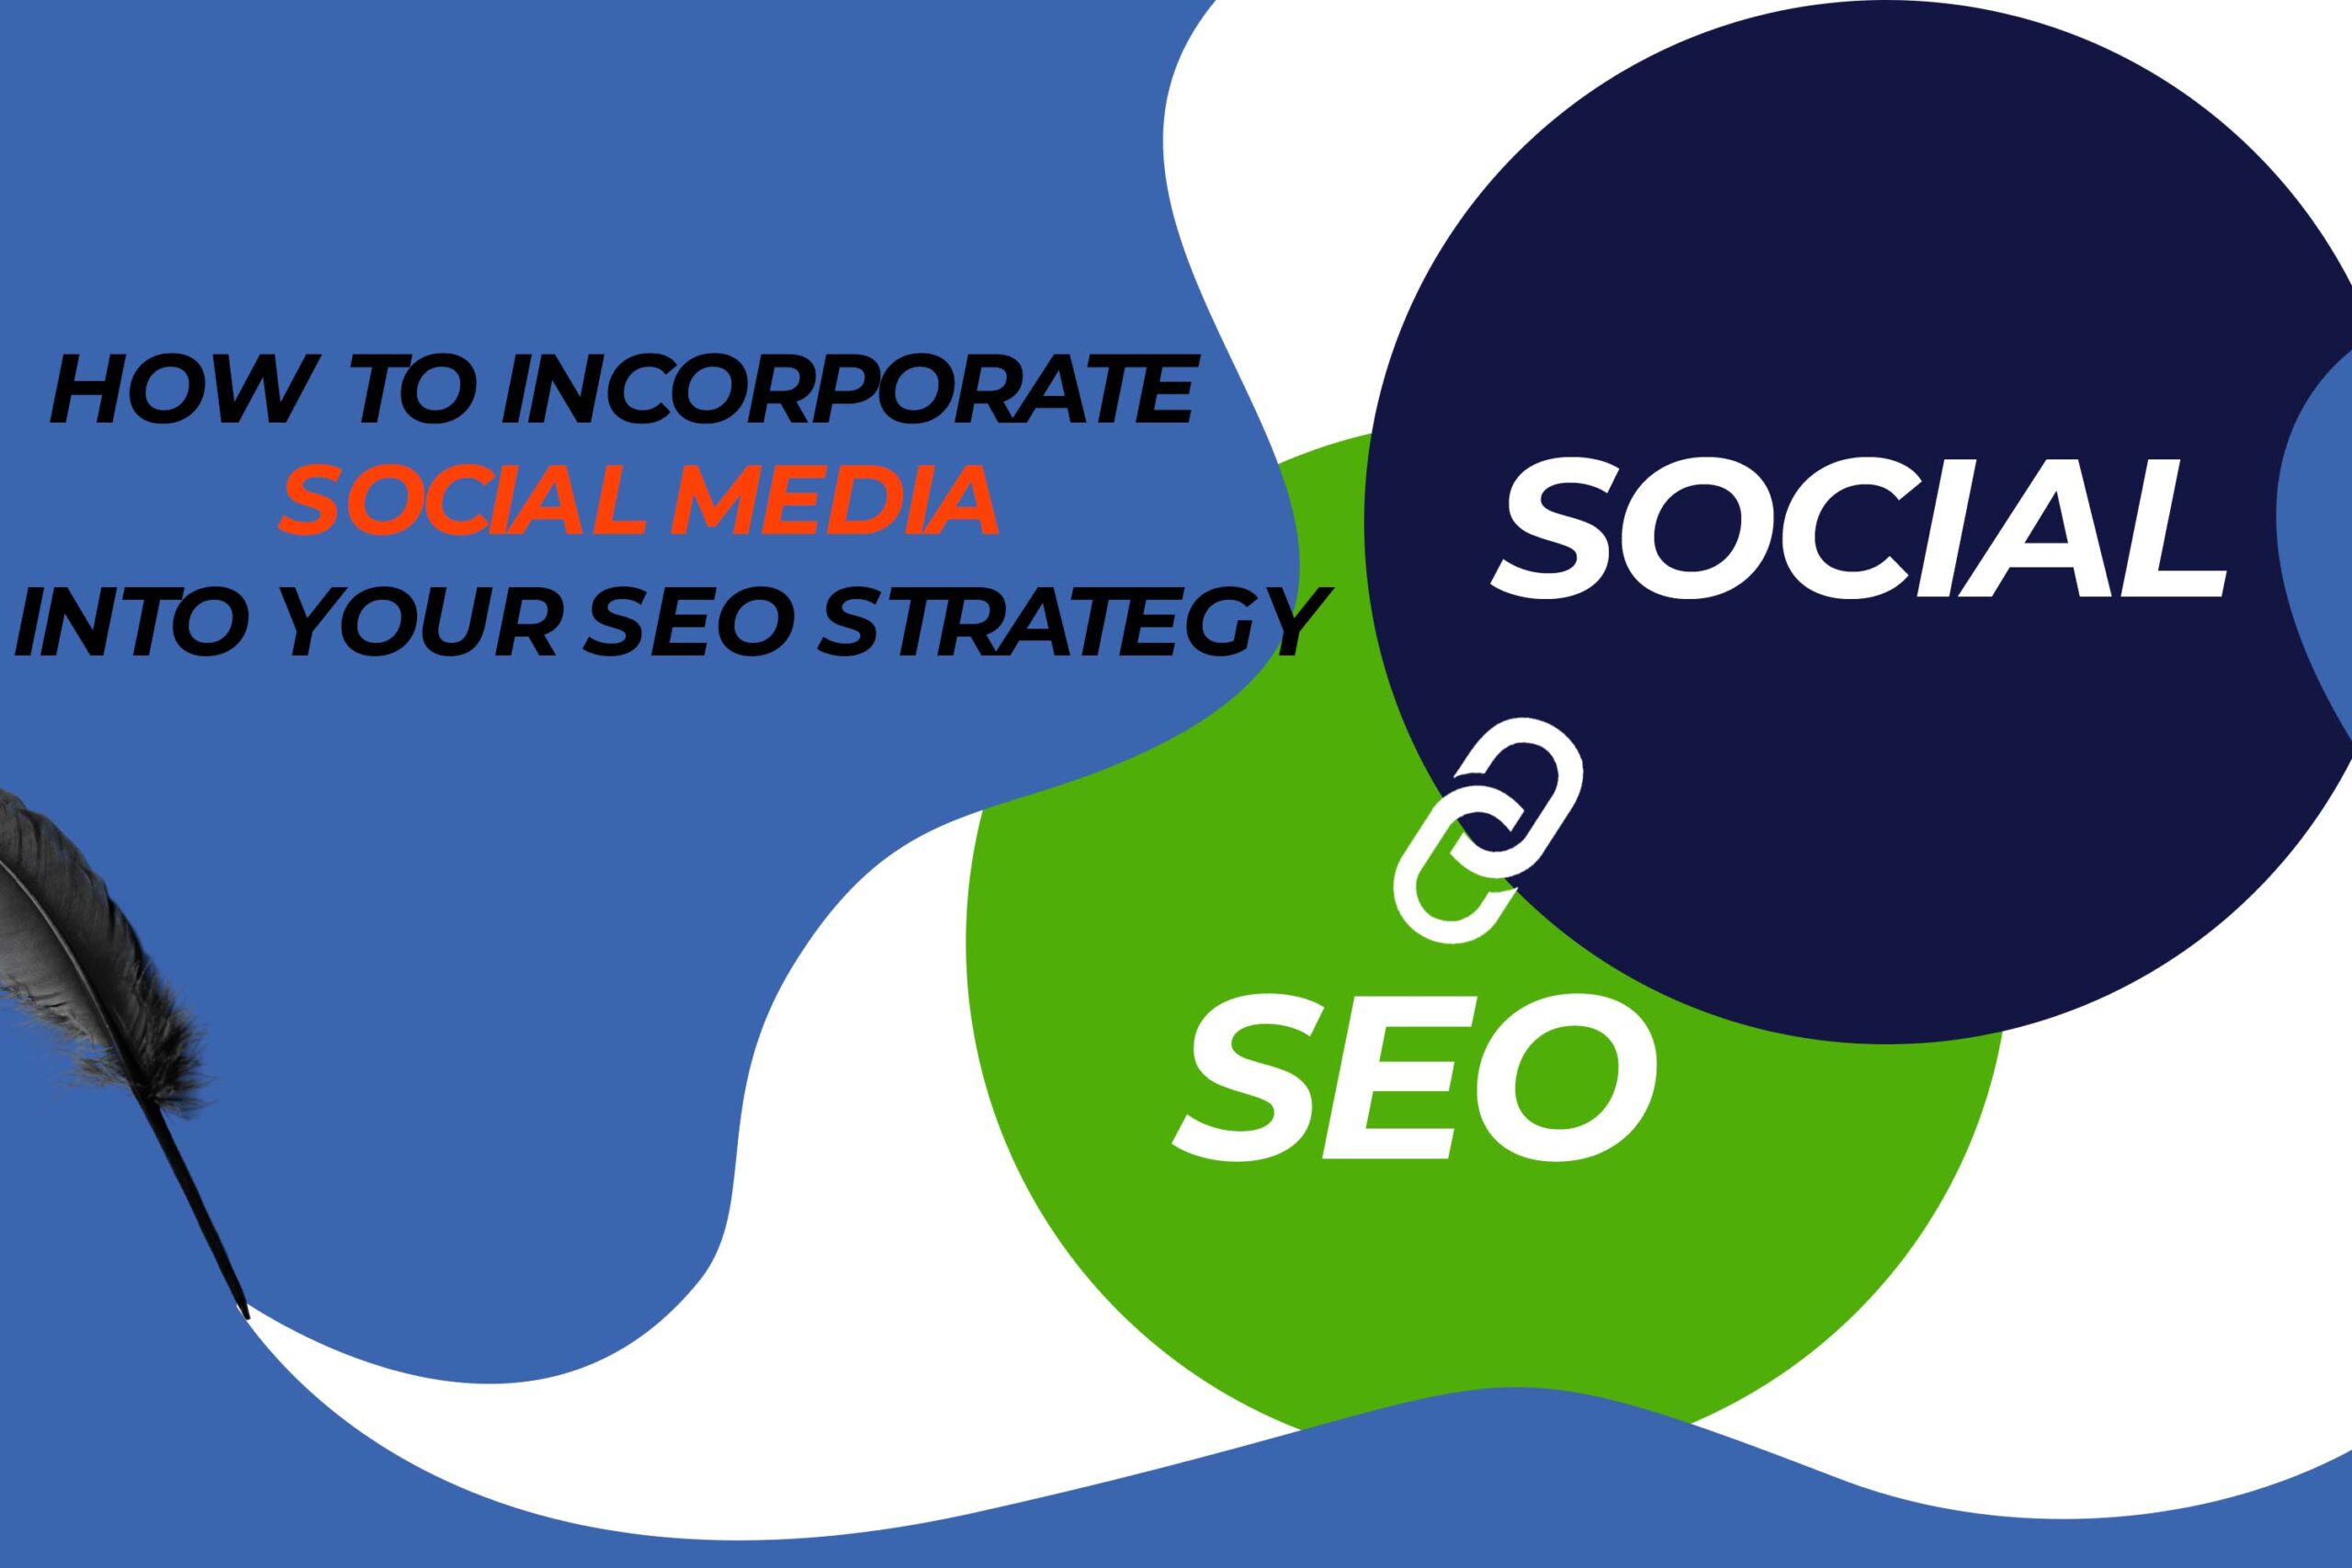 How to Incorporate Social Media Into Your SEO Strategy to Improve Rankings